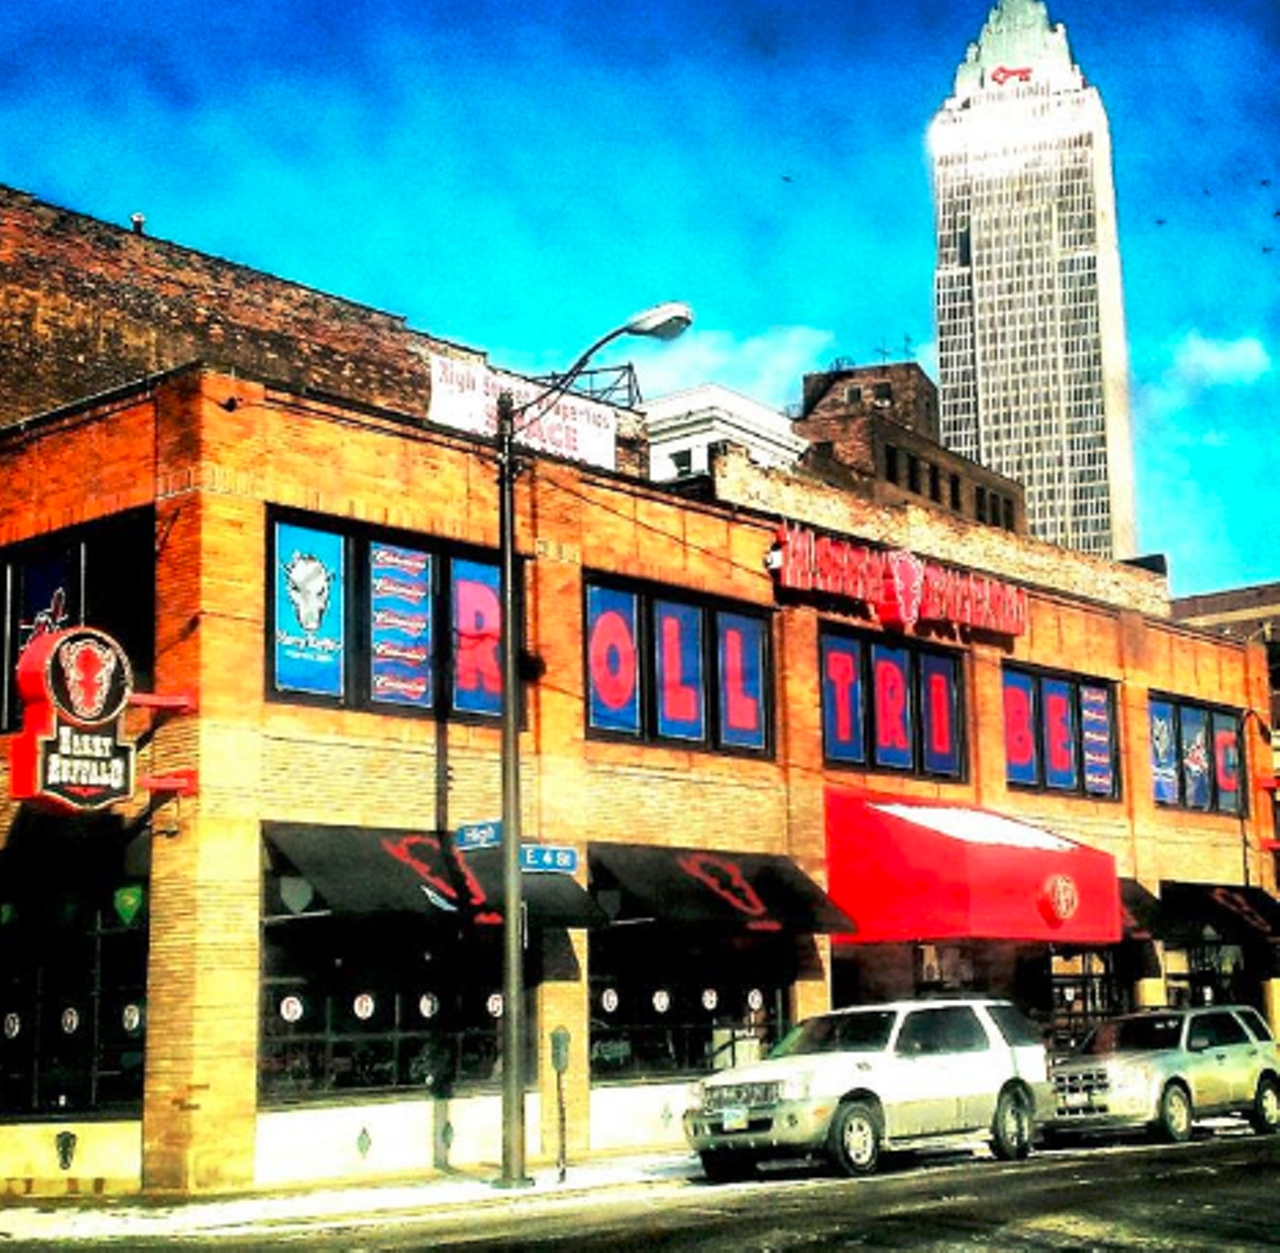 Positioned at Boardwalk & Park Place, the Harry Buffalo is a dependable haunt for any ballgame.